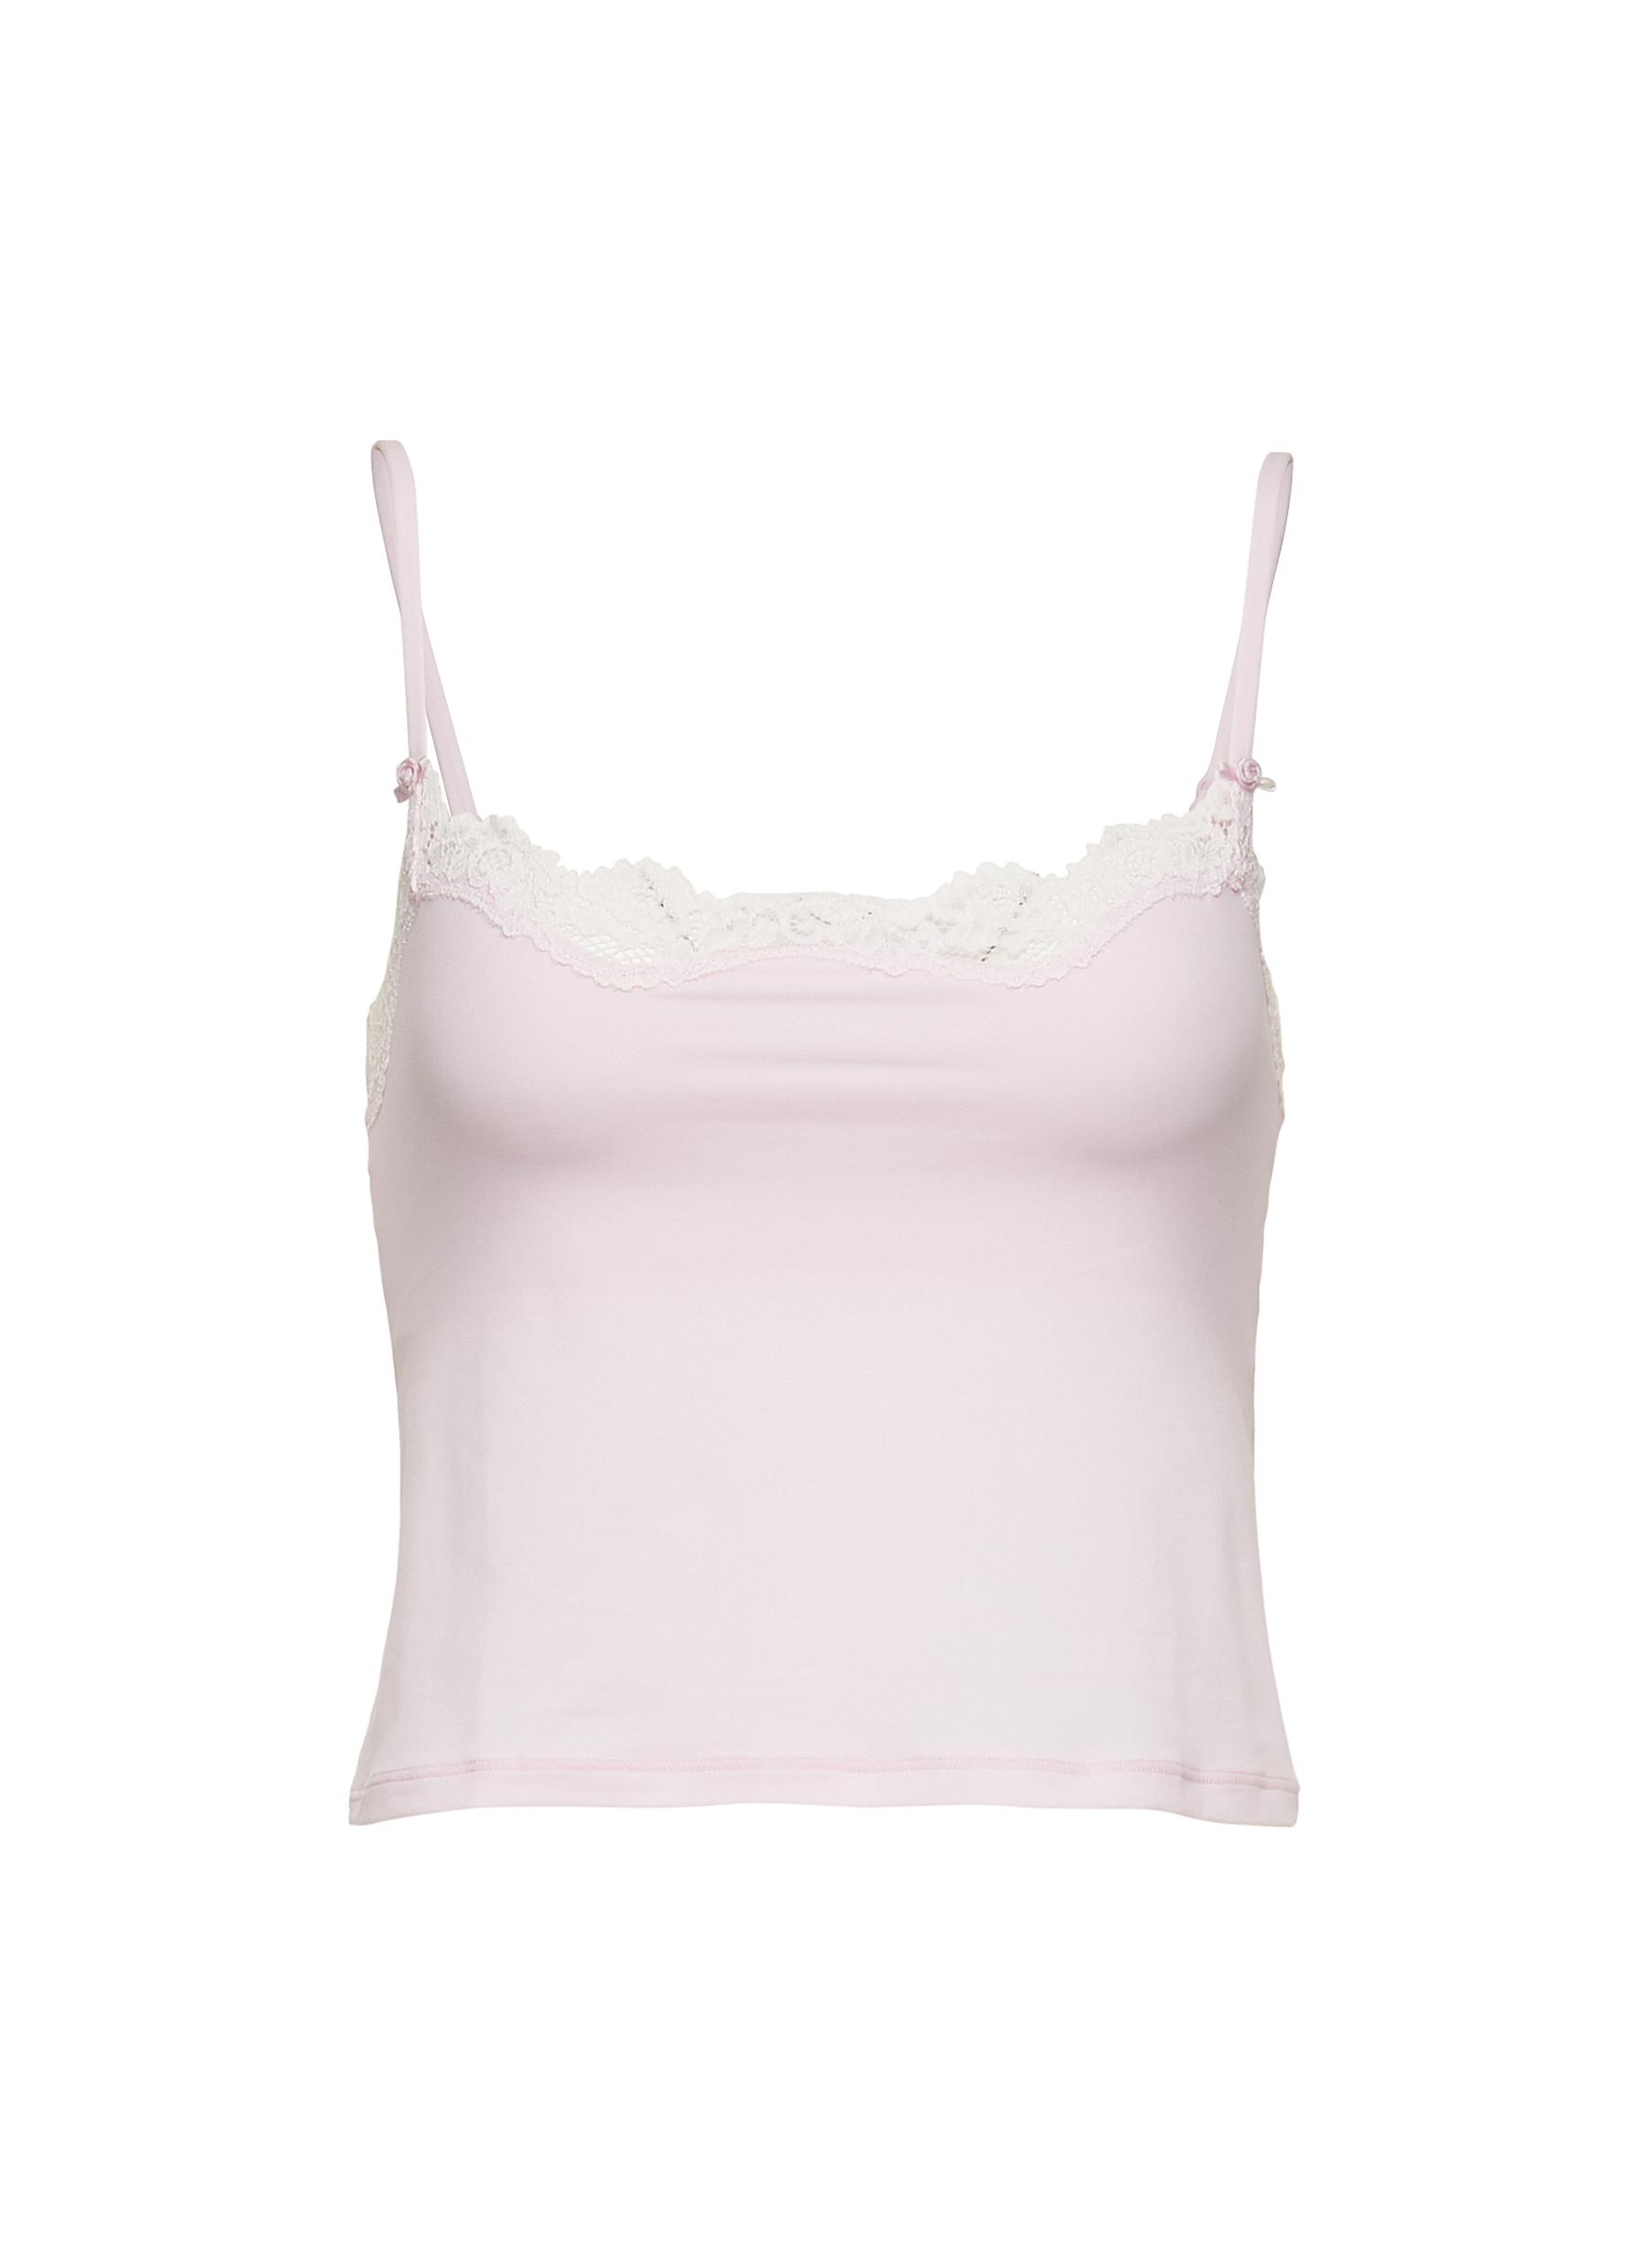 Buy Lace-trimmed strappy top online in Egypt